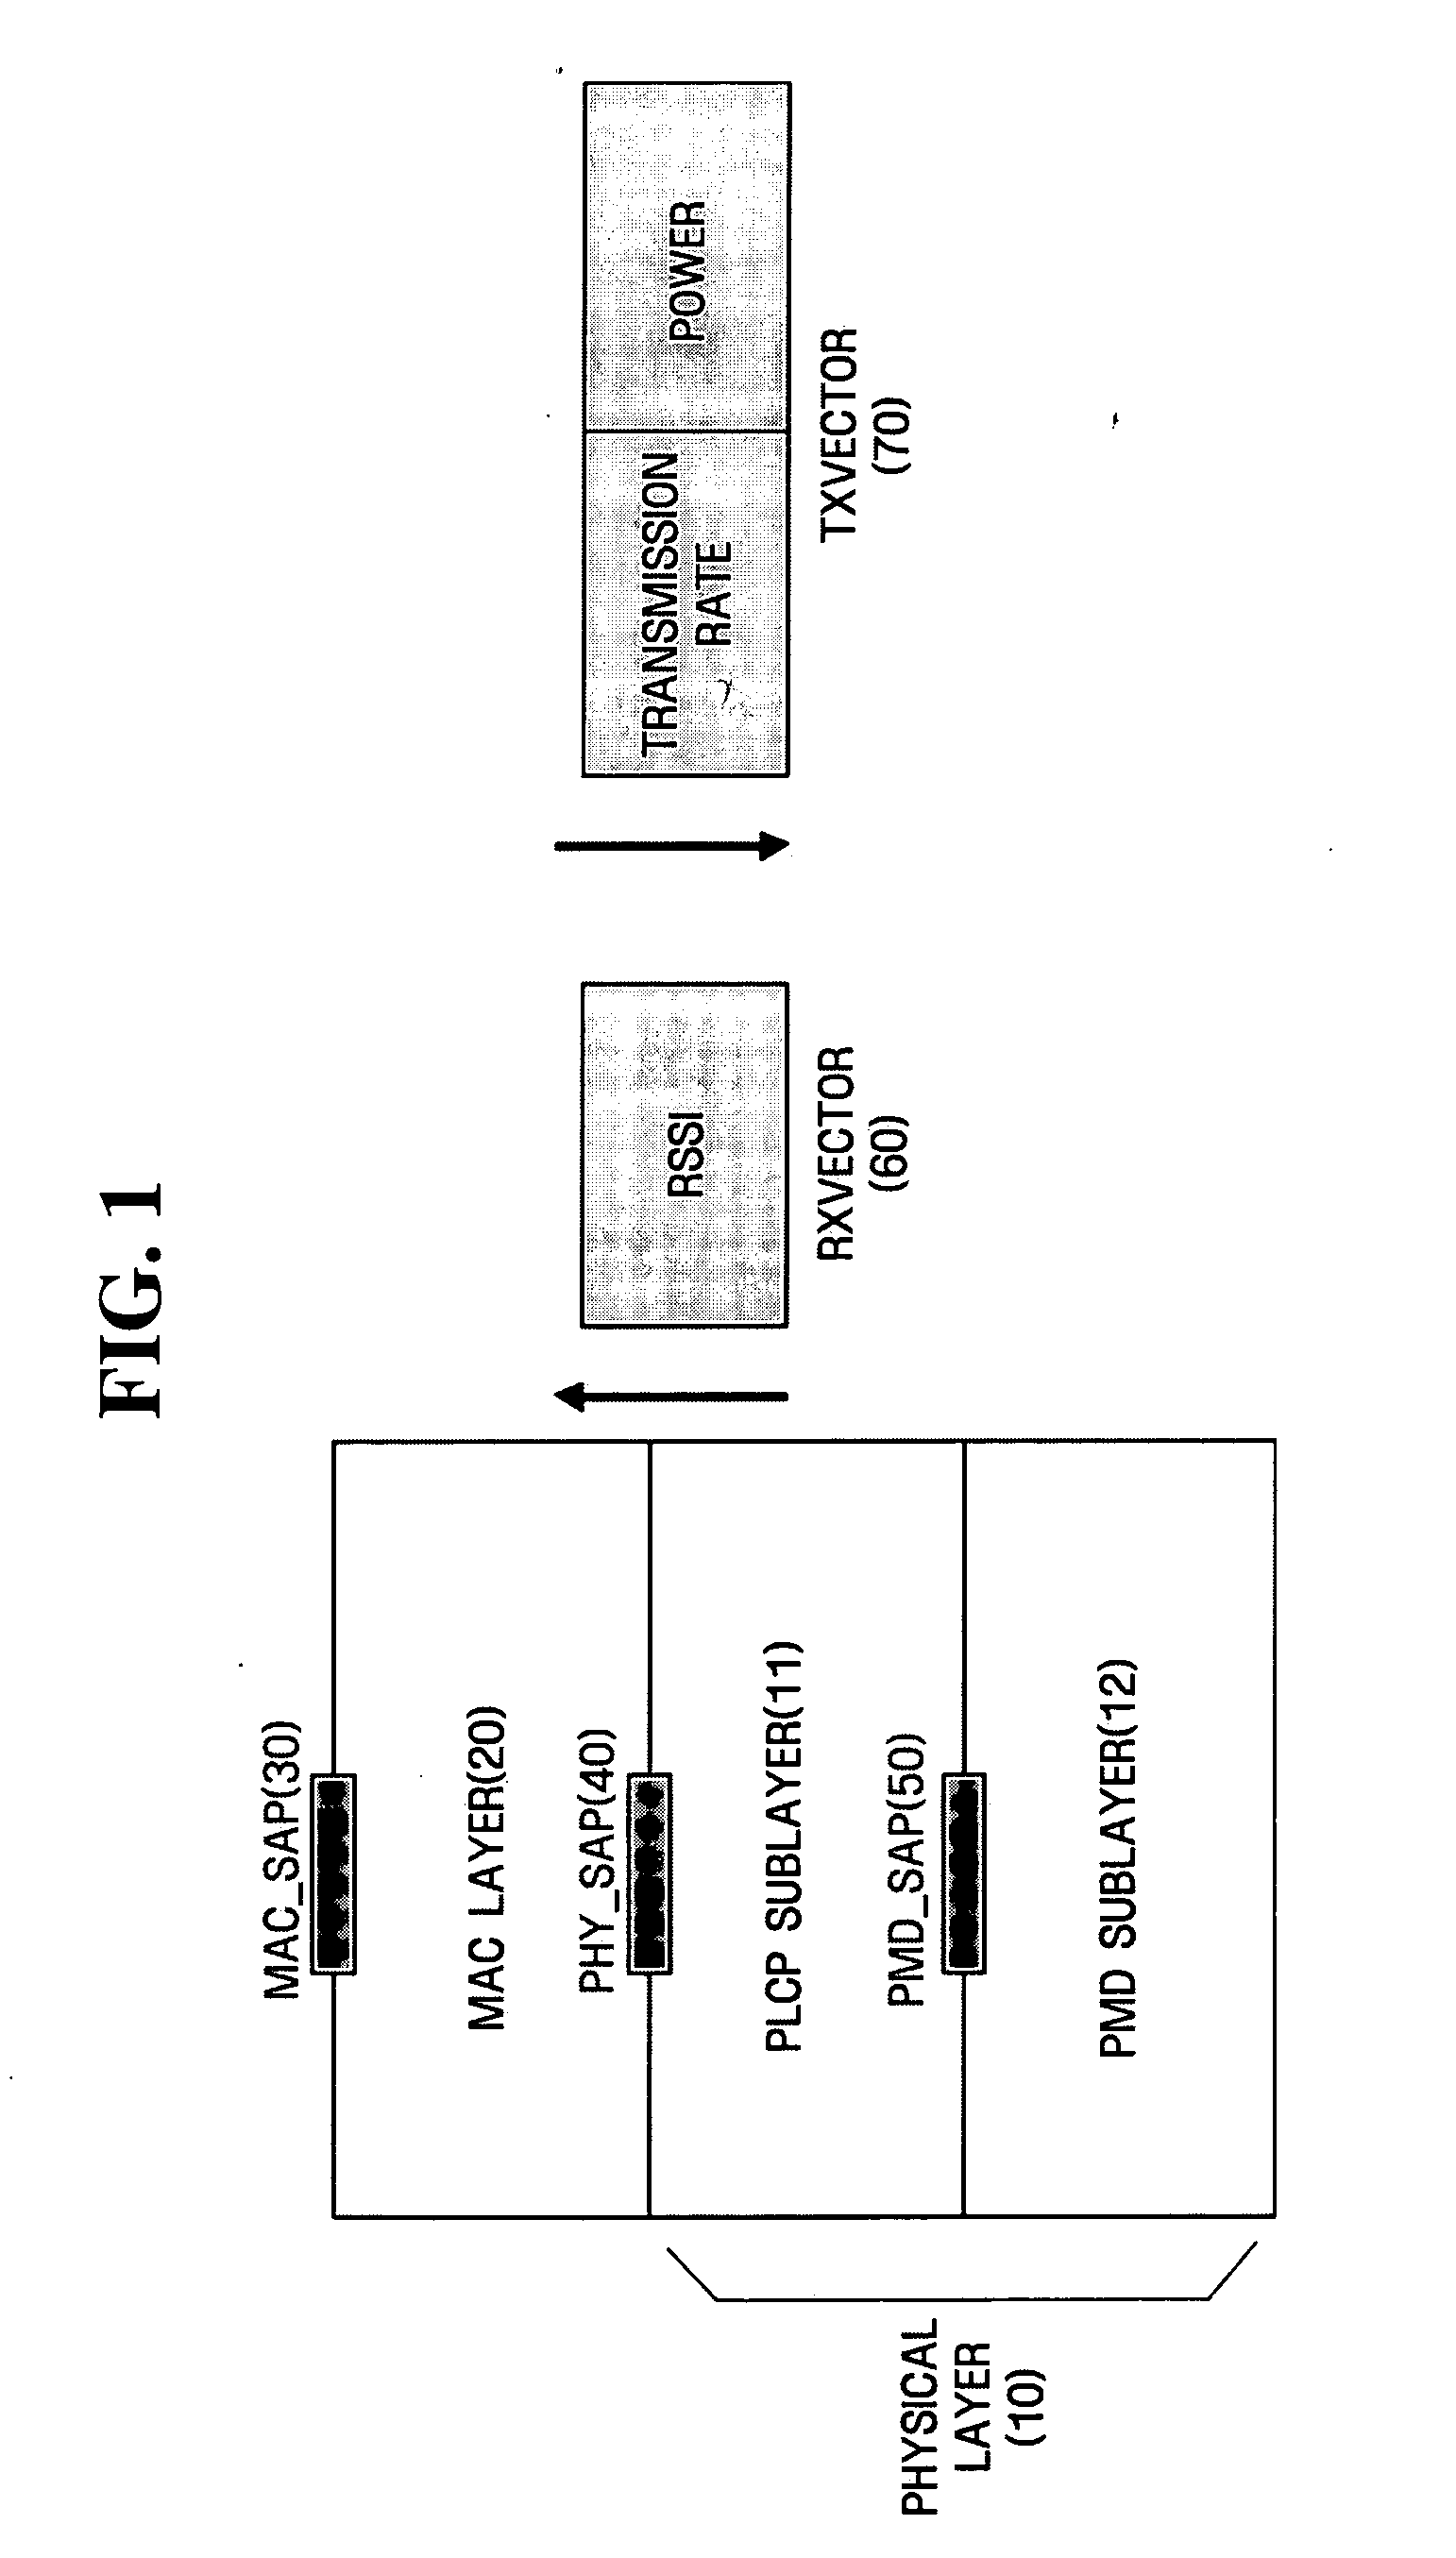 Method of communications between MIMO stations